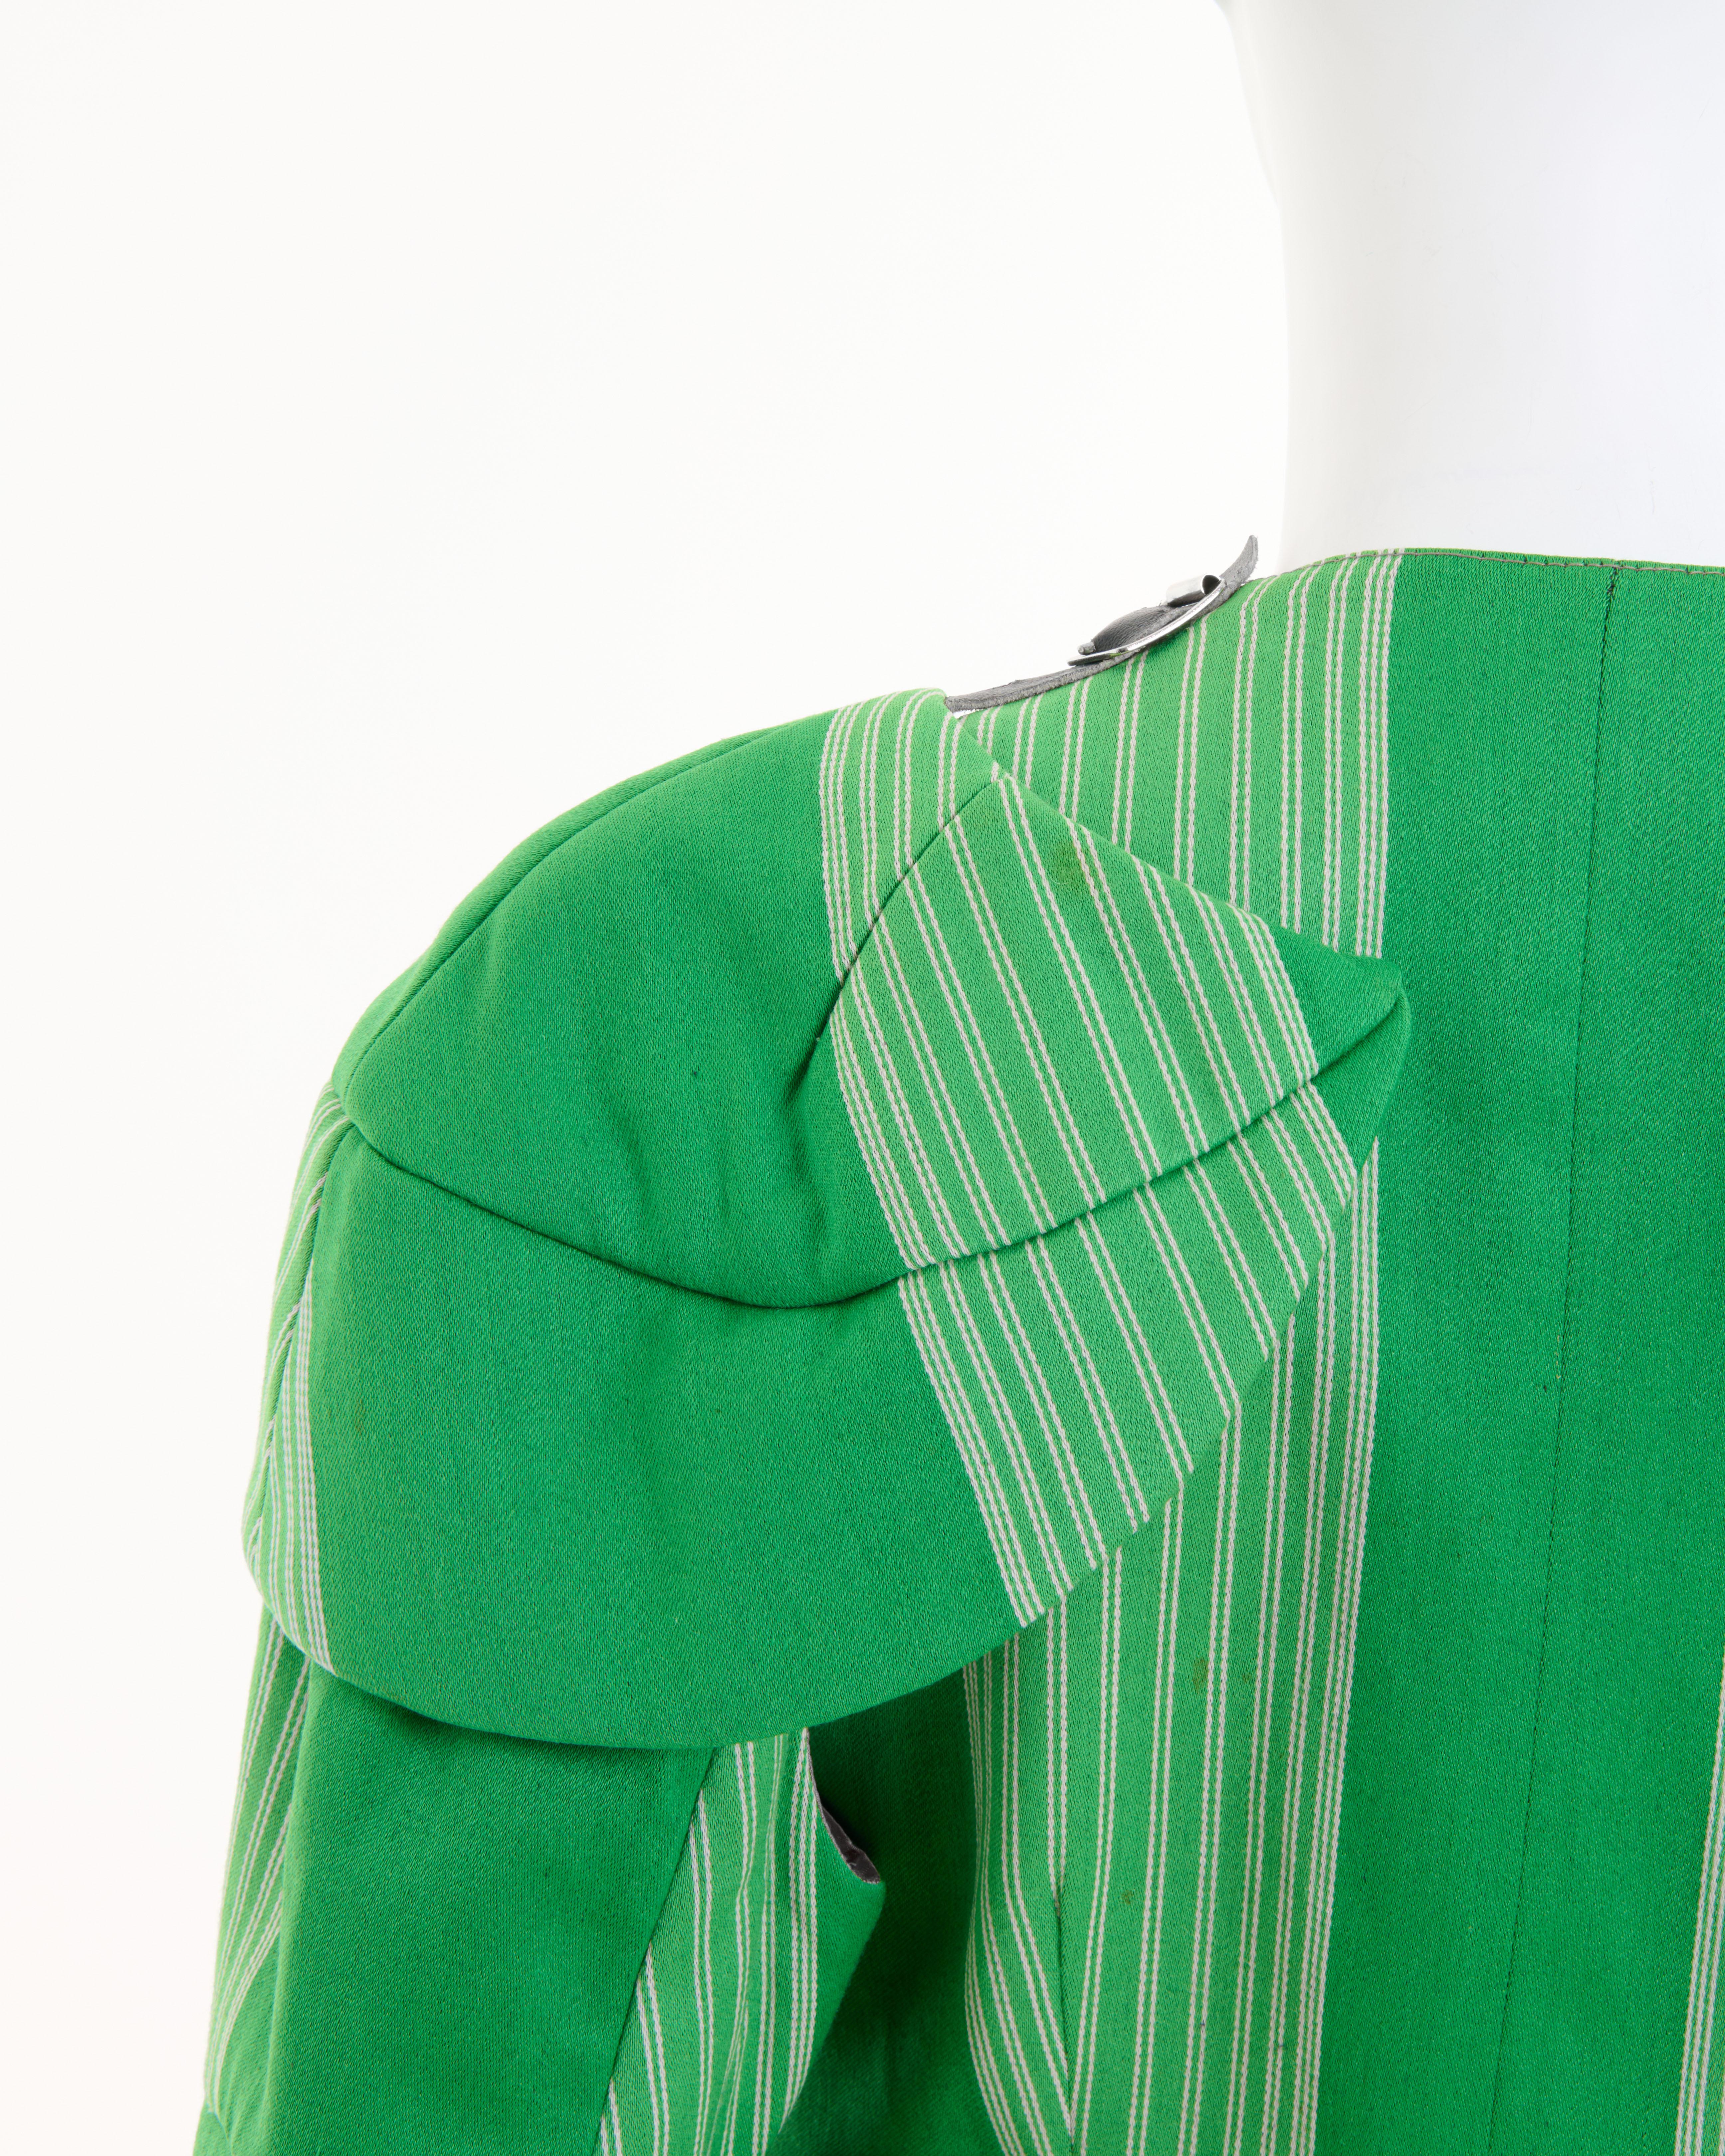 Vivienne Westwood  F/W 1988/89 ‘Time Machine’ Green striped Armour jacket For Sale 3